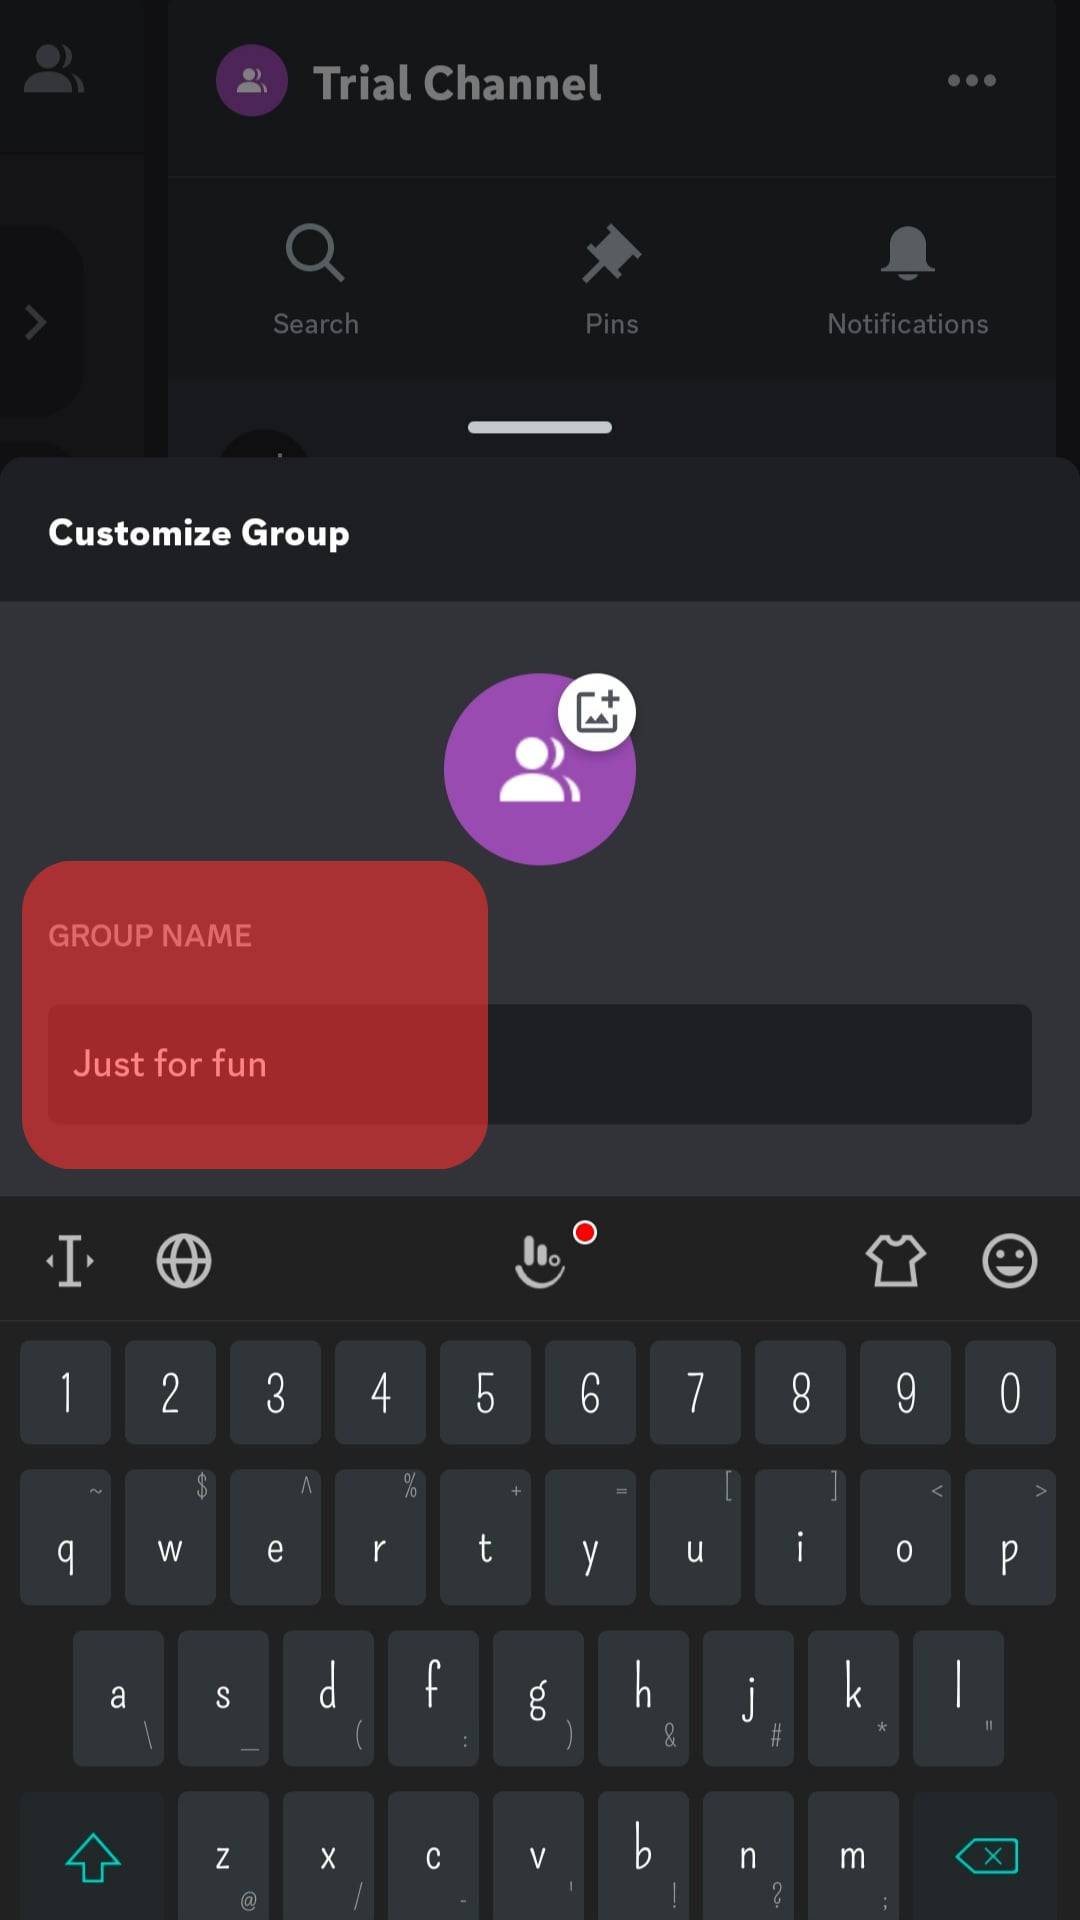 Change The Name To Your Desired Name In Group Name Section